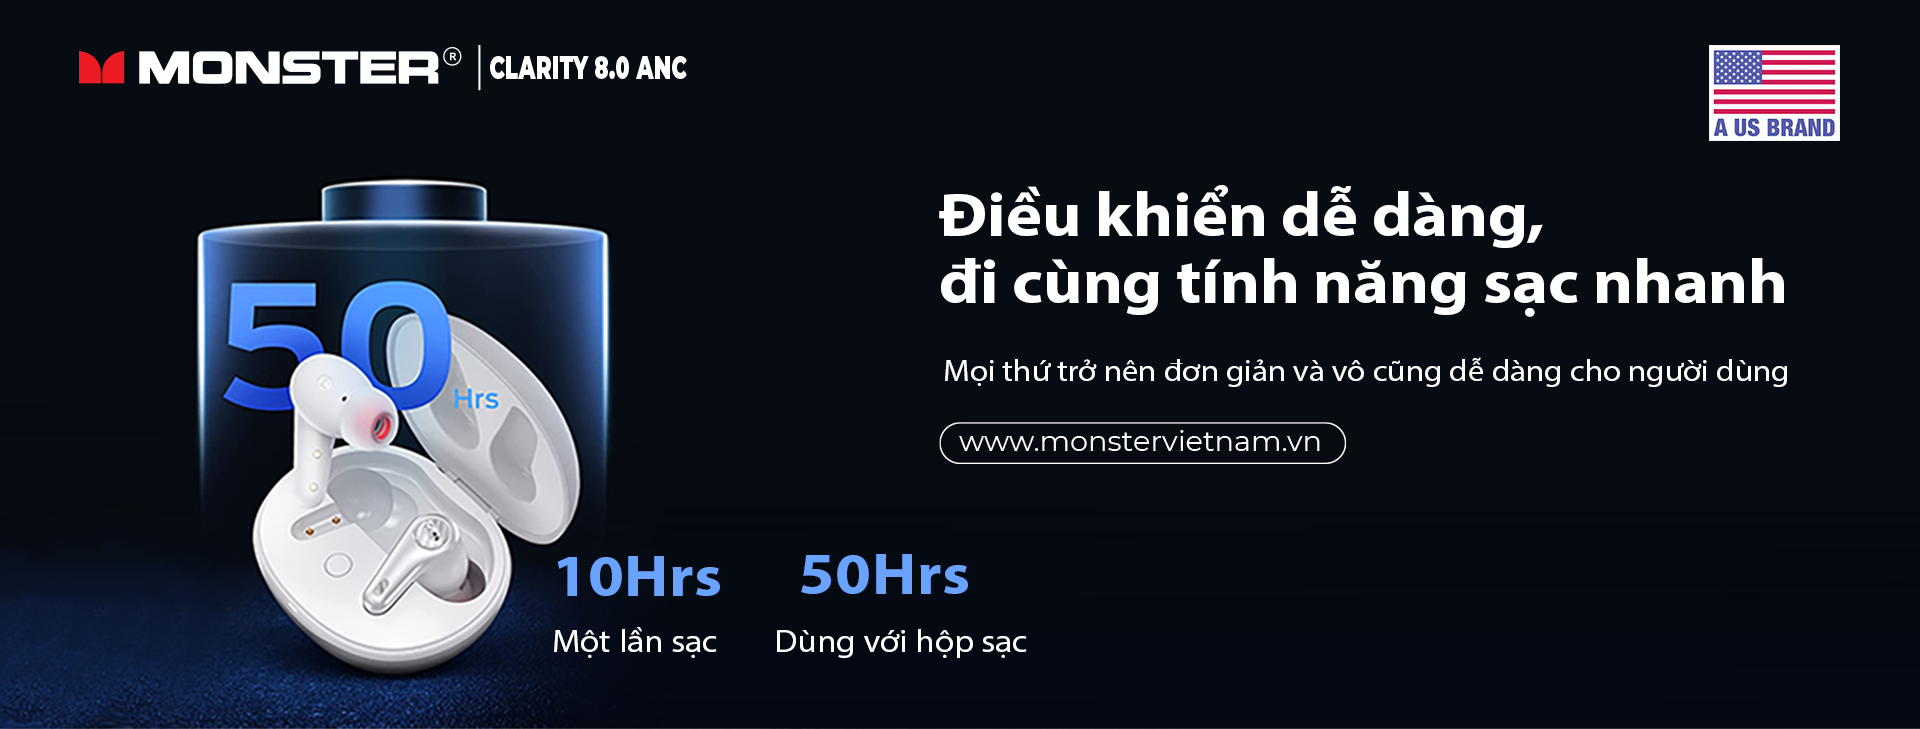 Tai nghe True Wireless Monster Clarity 8.0 ANC | Anh Duy Audio